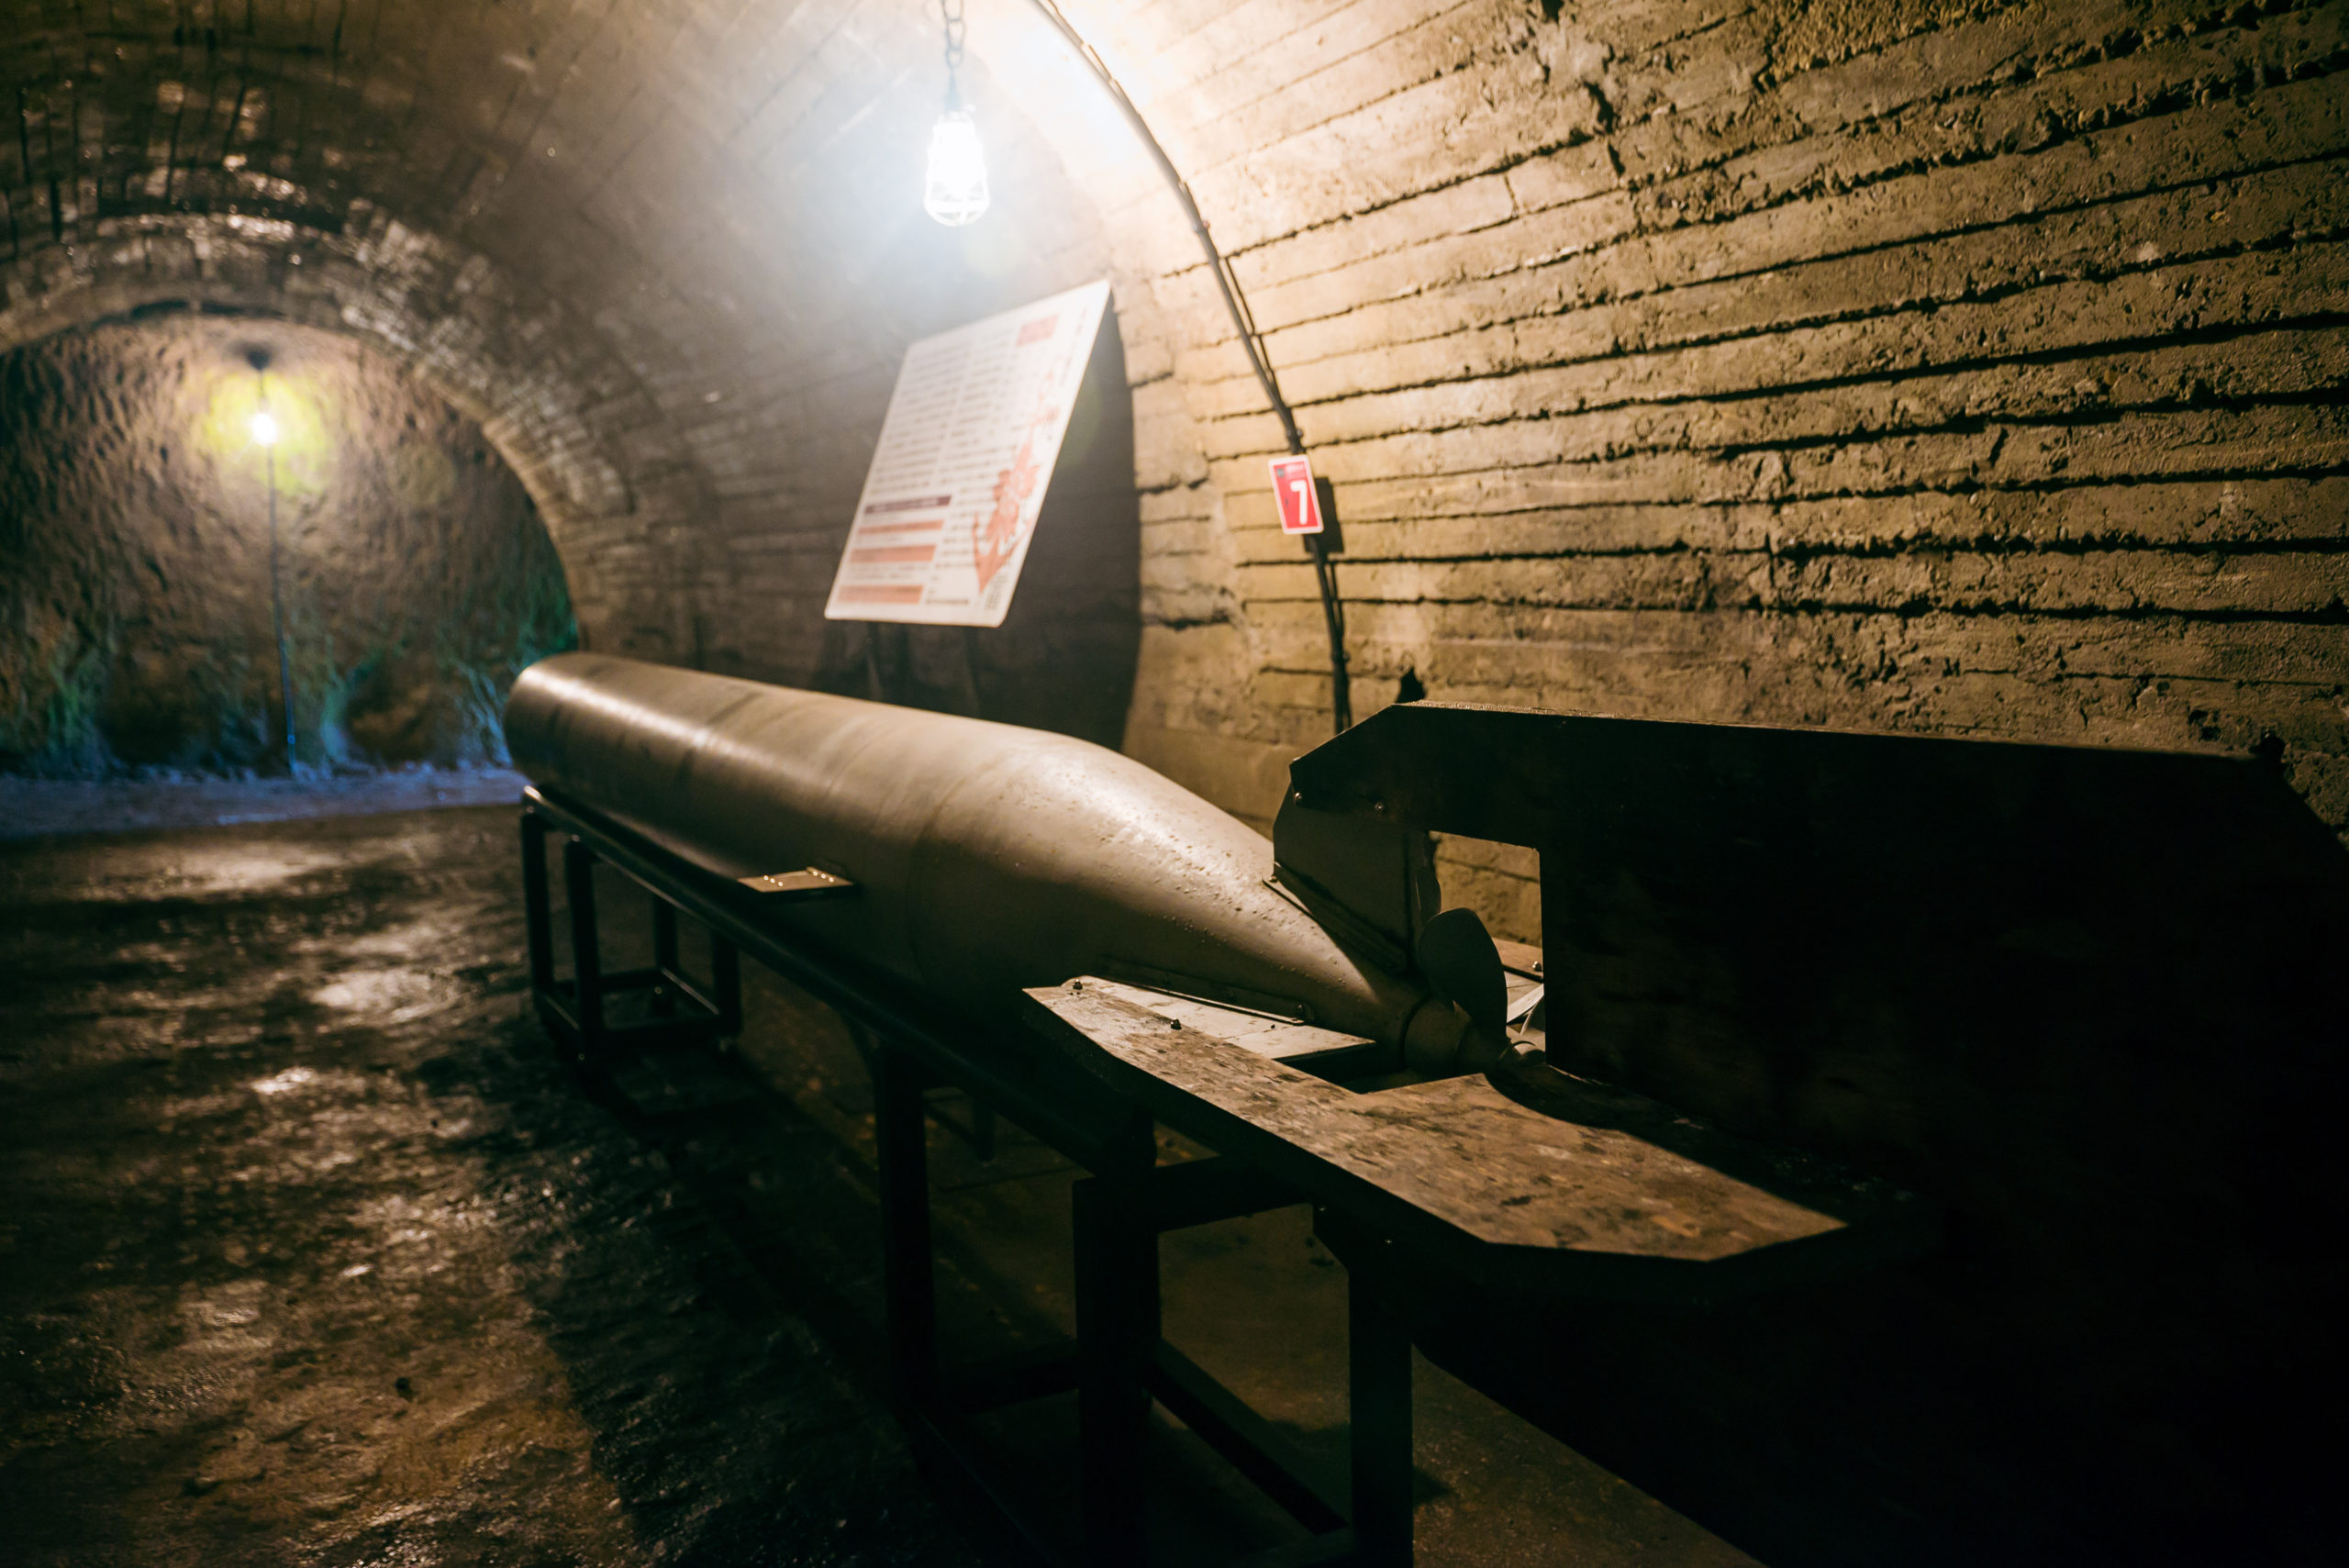 A life-size replica of a torpedo in underground tunnel of Nishiki Secret Base Museum